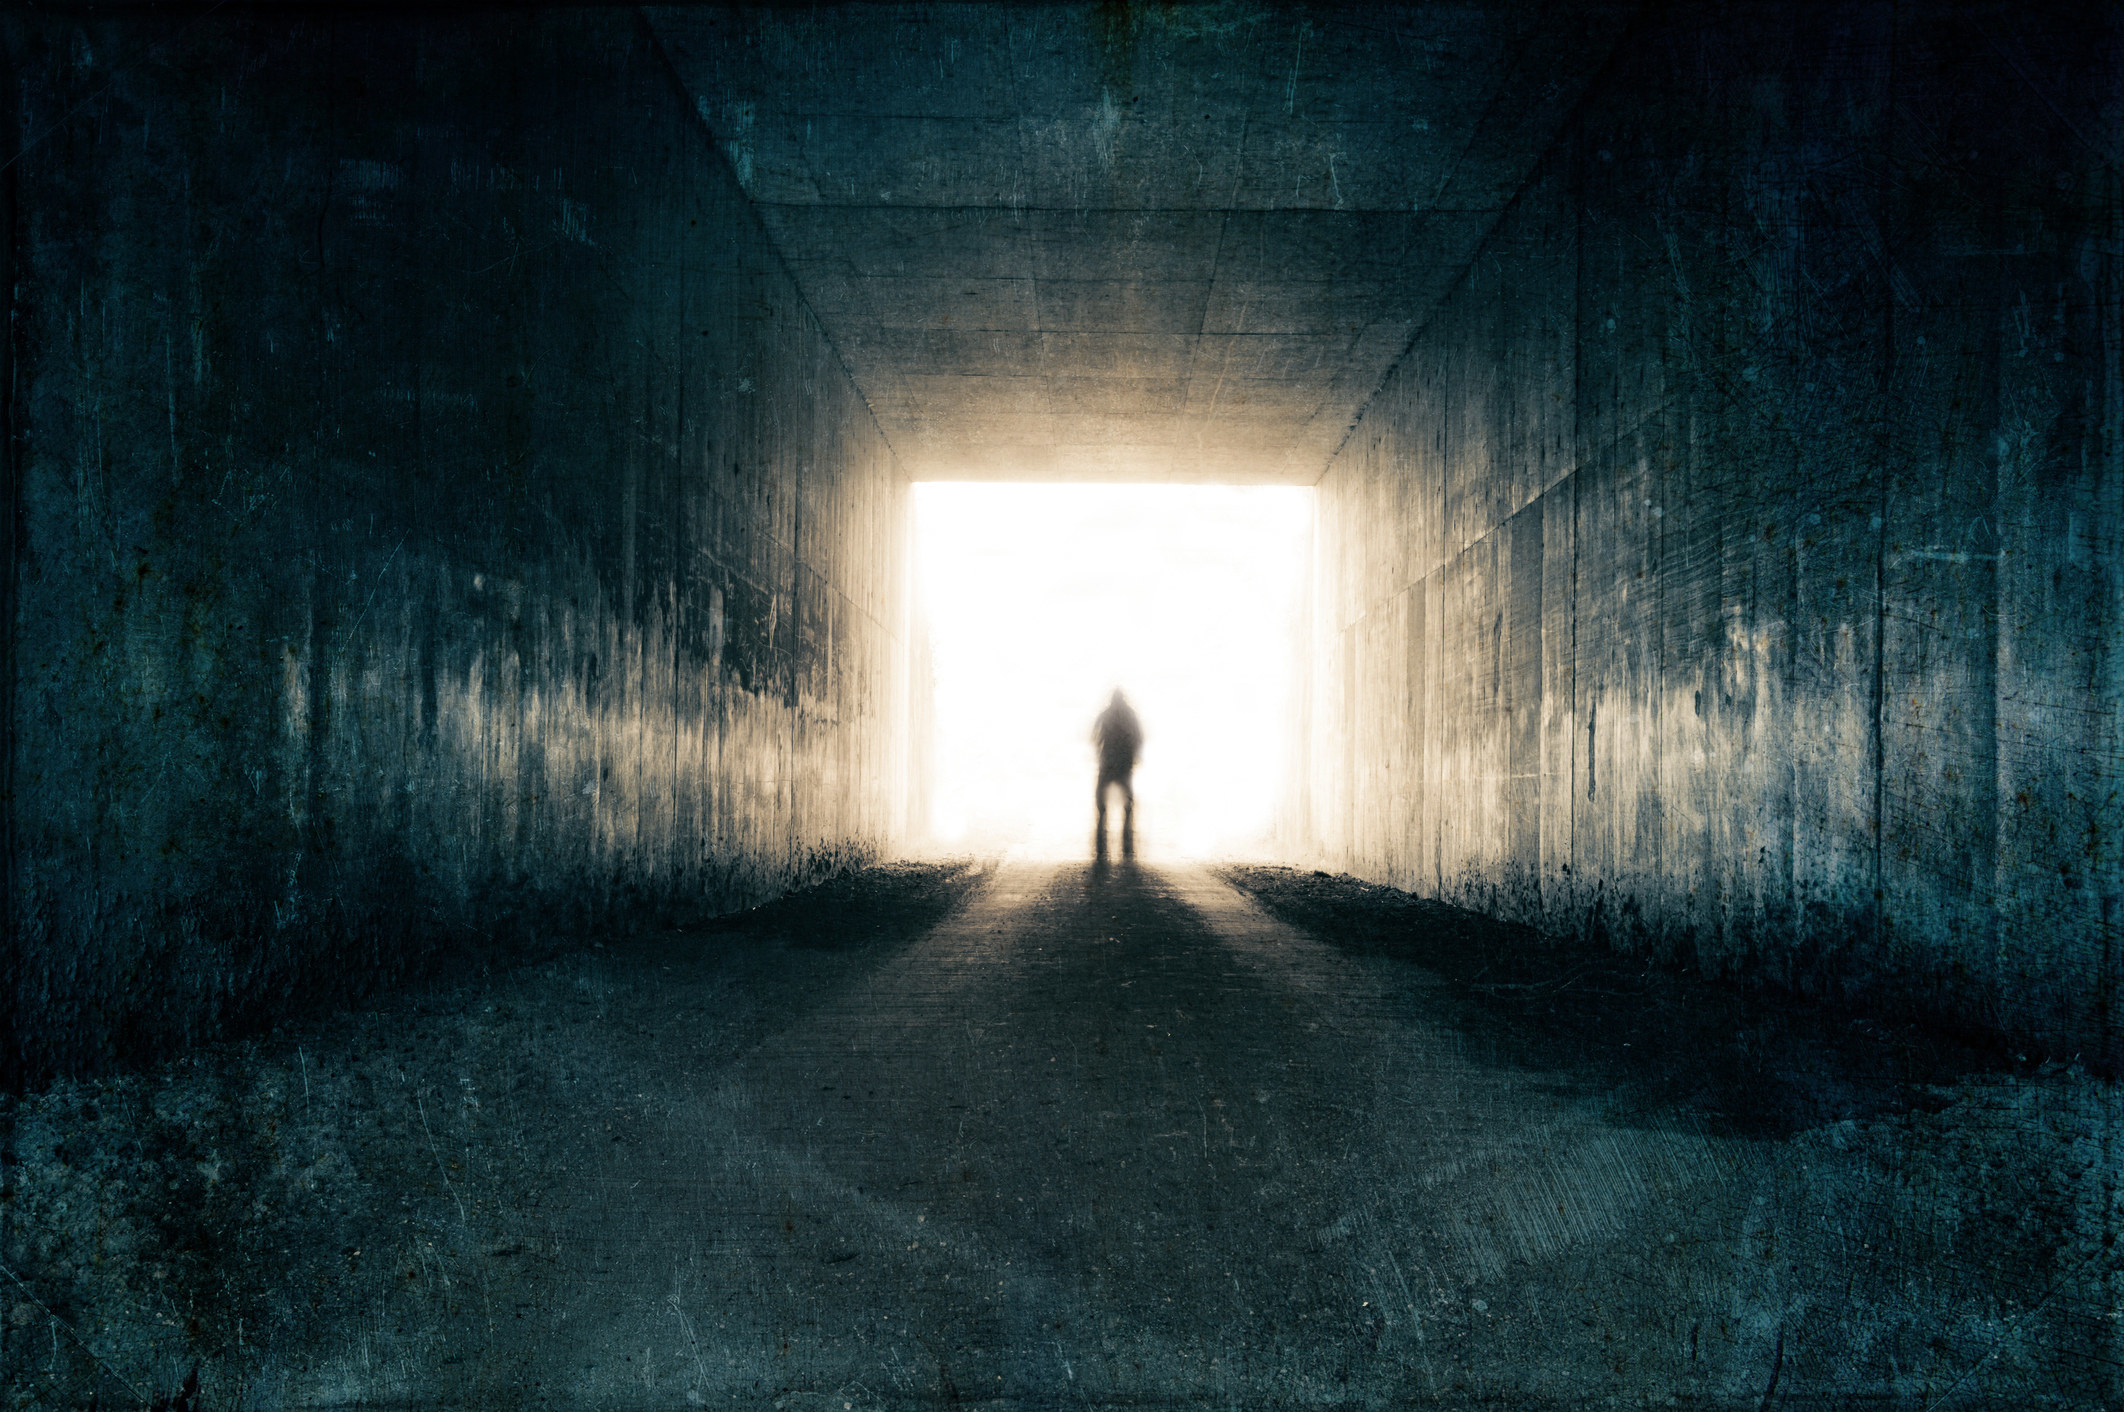 A dark walkway with a bright light at one end, within it is the dark silhouette of a man